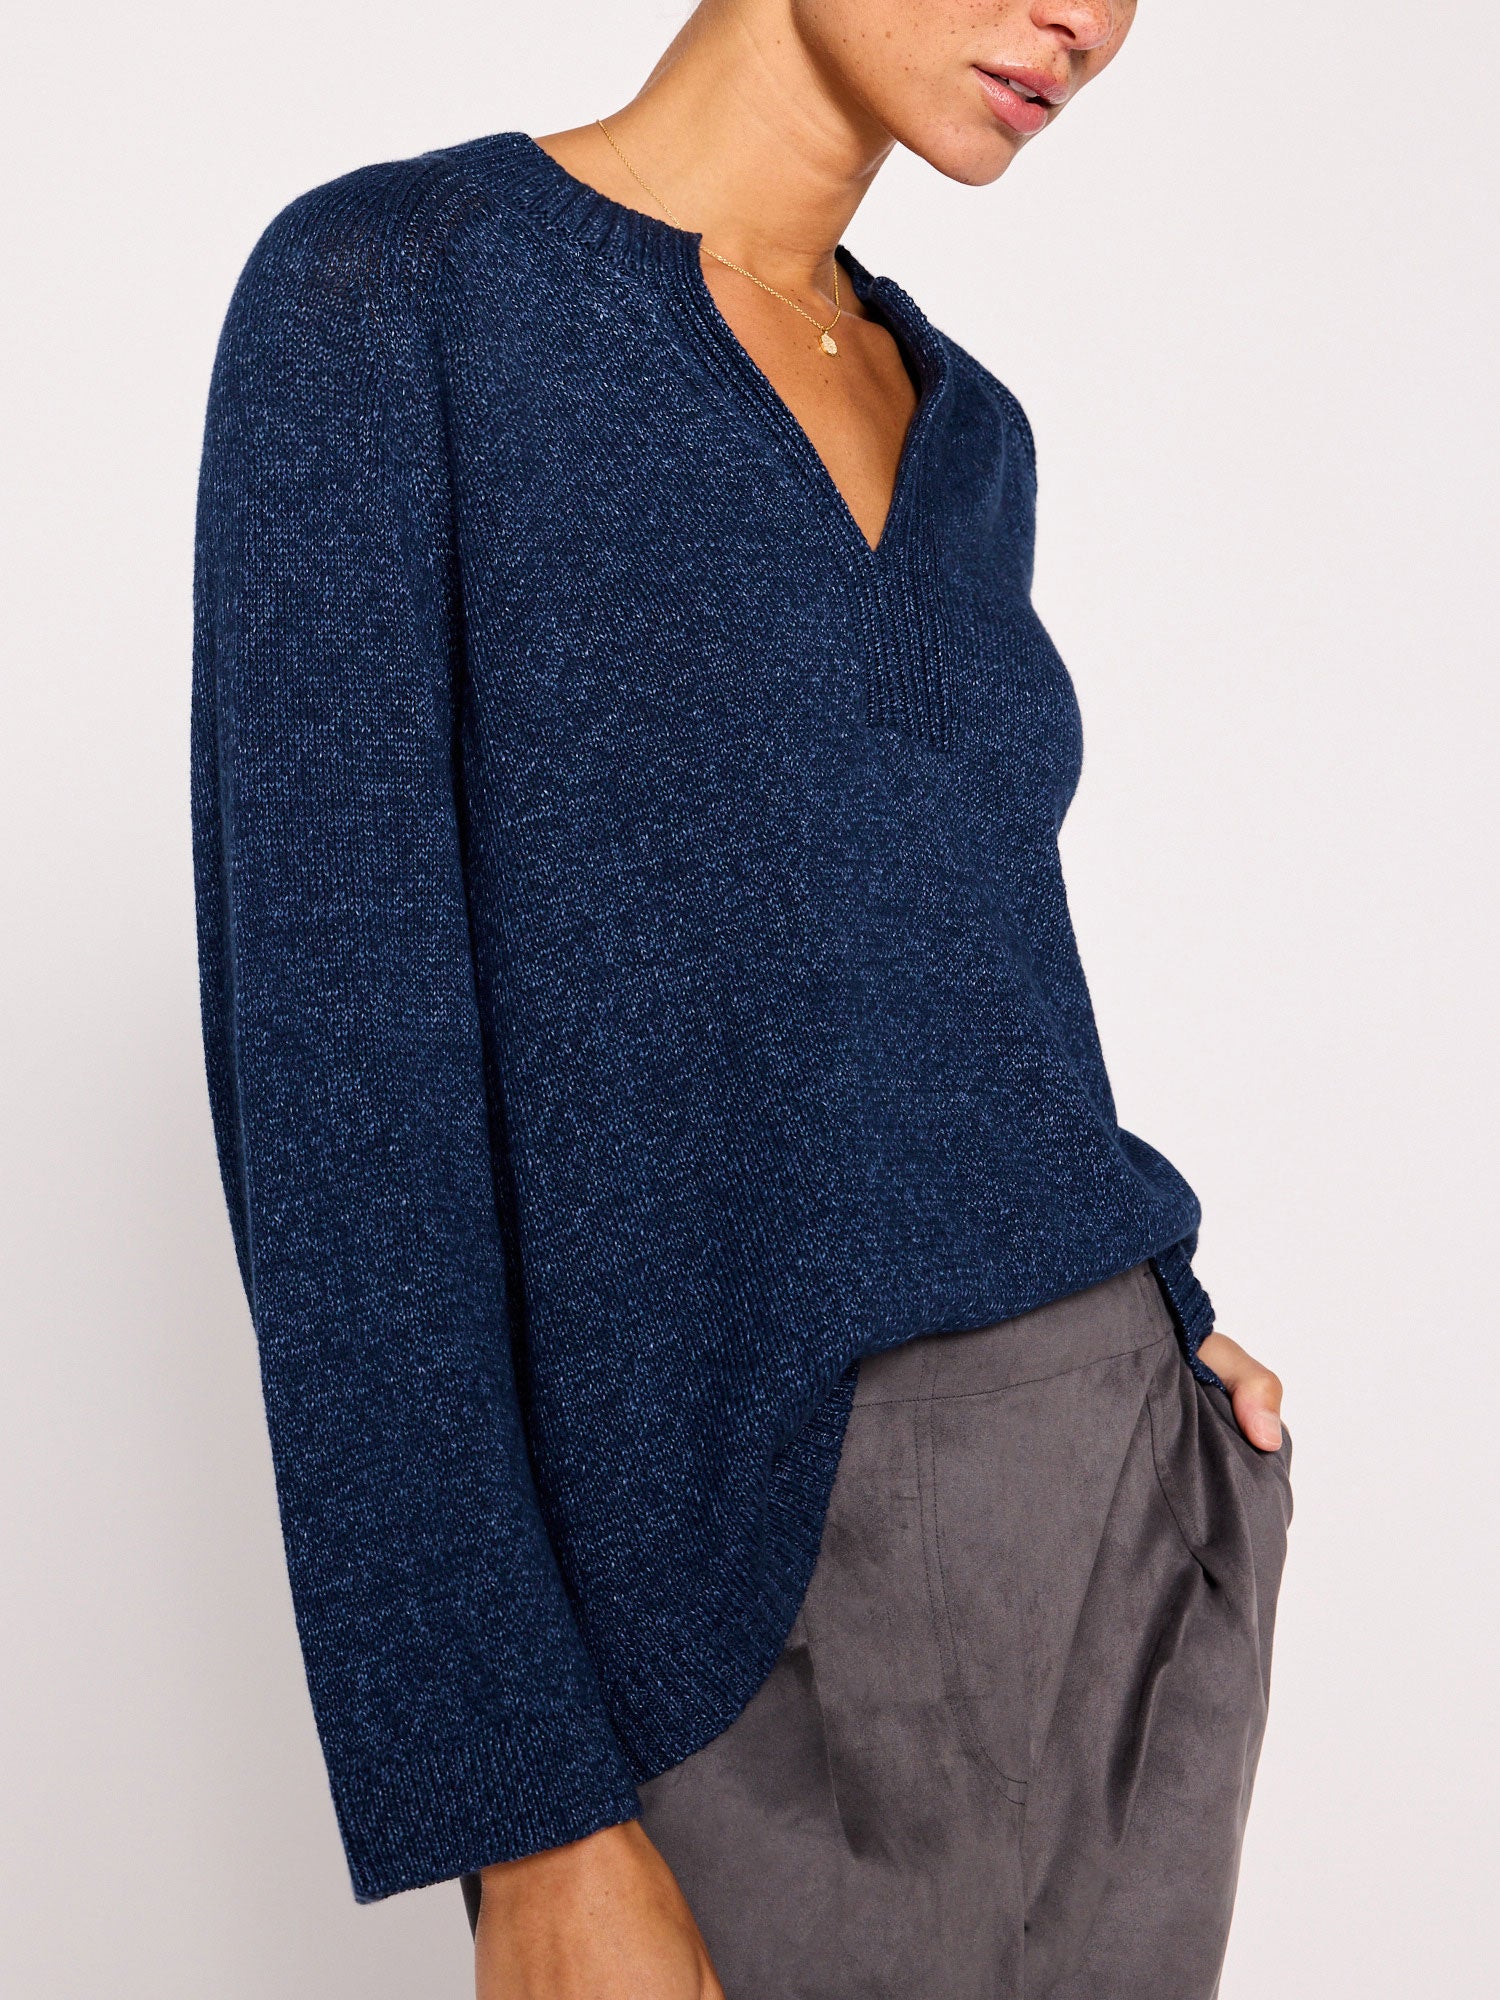 Riley navy v-neck linen cotton popover sweater side view